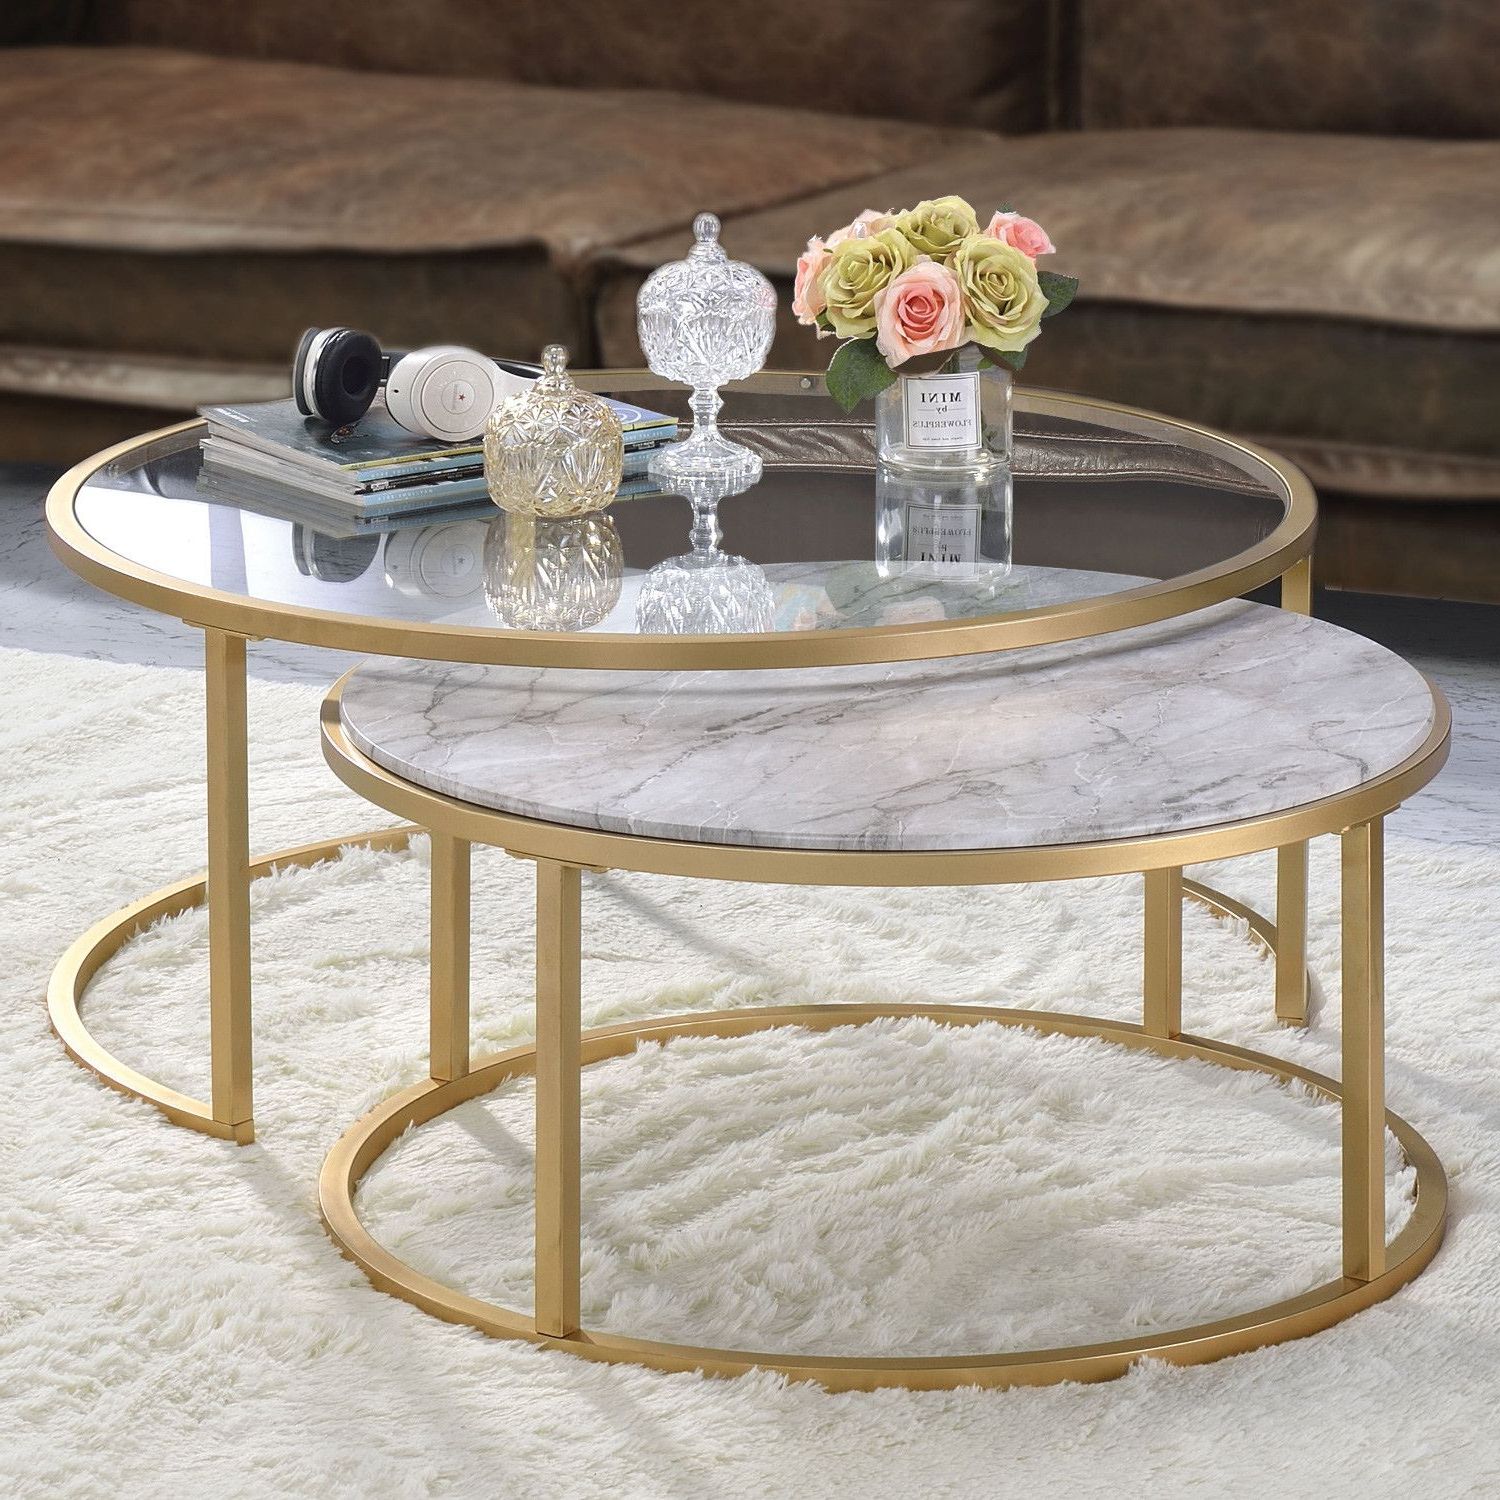 Trendy Geometric Glass Top Gold Coffee Tables Inside Gold And Glass Nesting Coffee Tables : The Leo Coffee (Gallery 10 of 20)